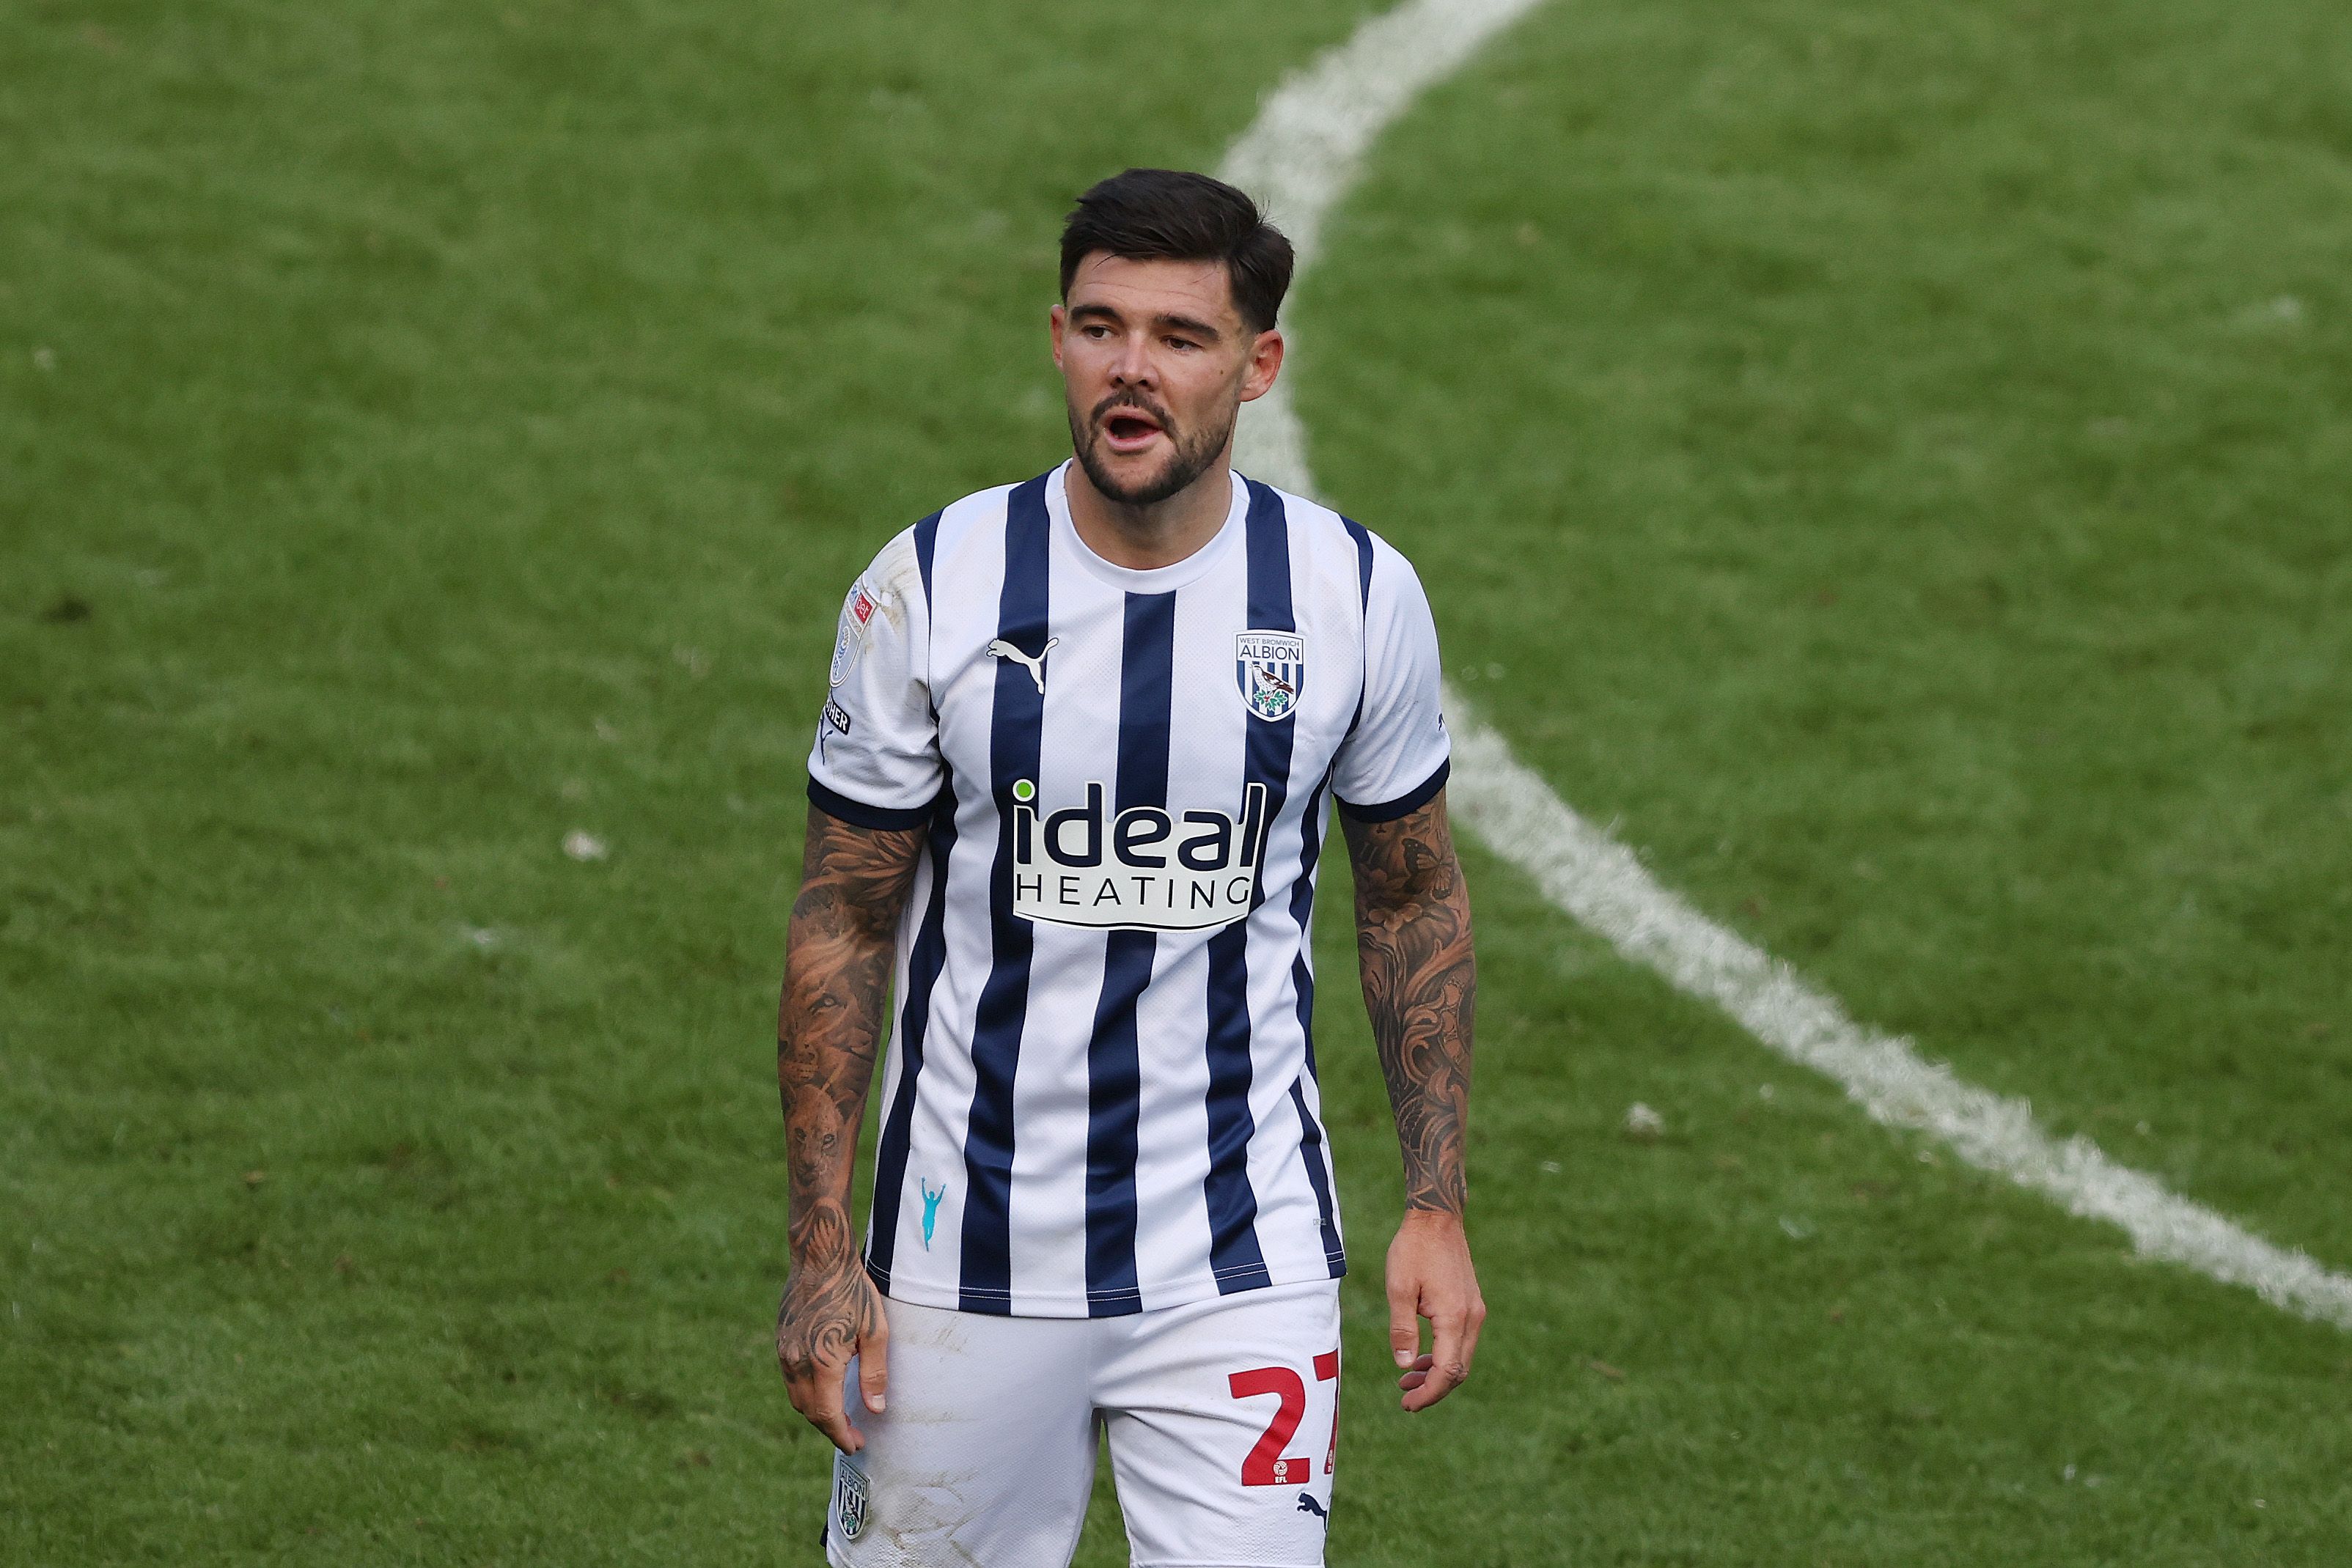 Alex Mowatt in action for Albion wearing the home kit